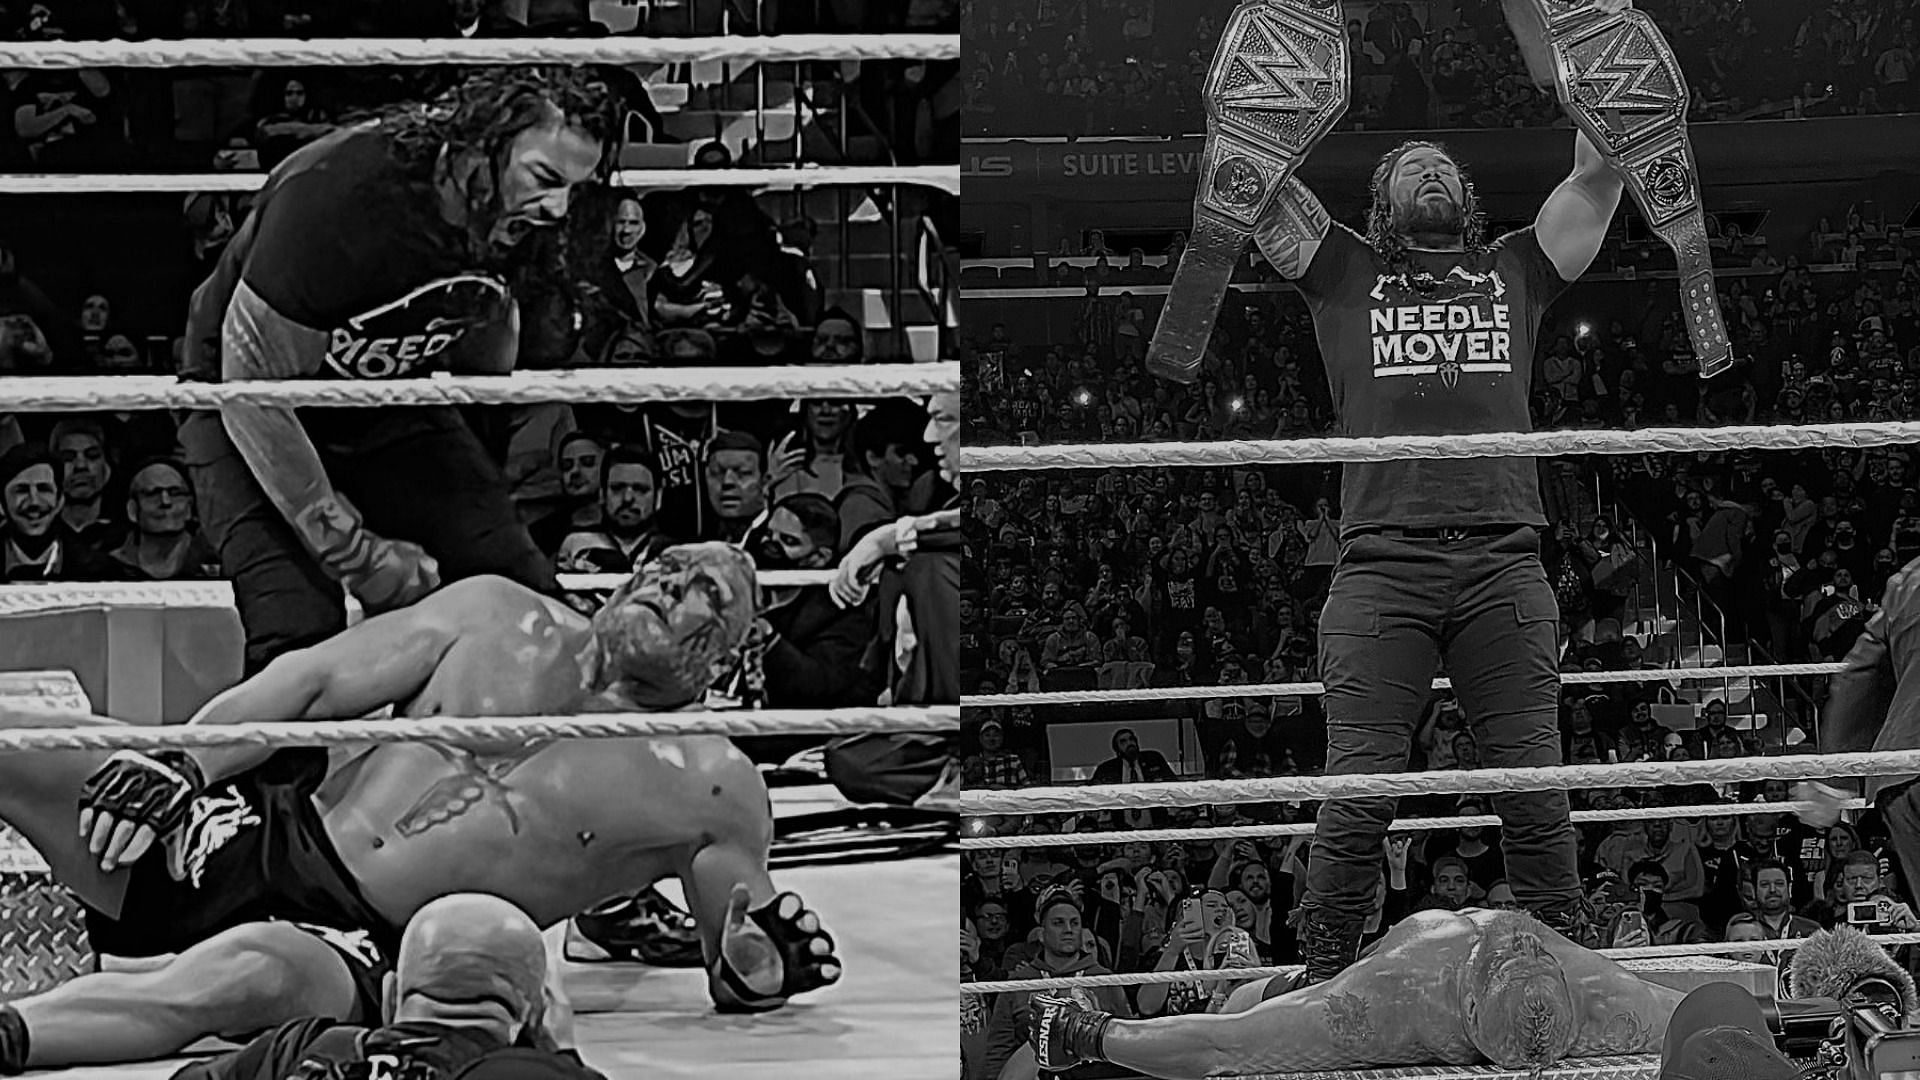 Roman Reigns launched a vicious attack on the Beast Incarnate at MSG